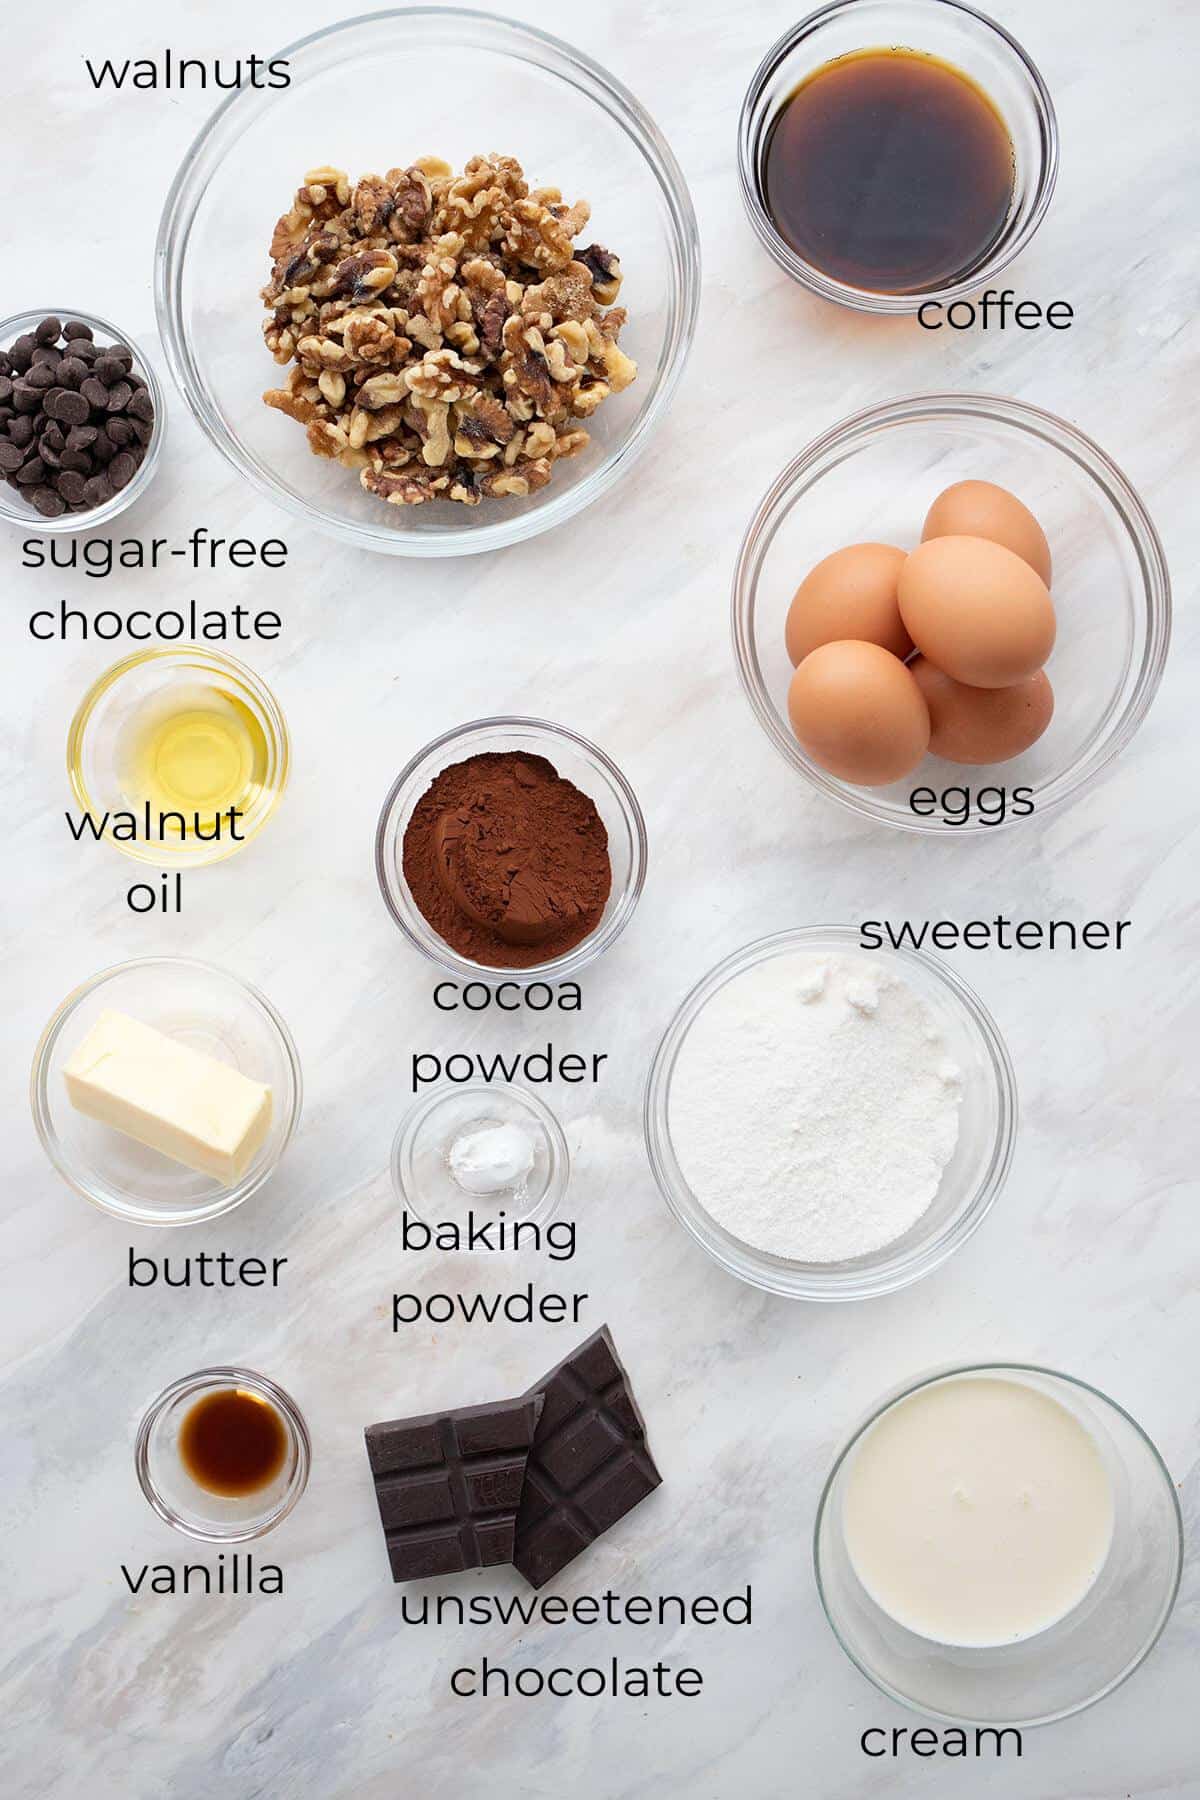 Top down image of ingredients needed for Keto Chocolate Walnut Torte.